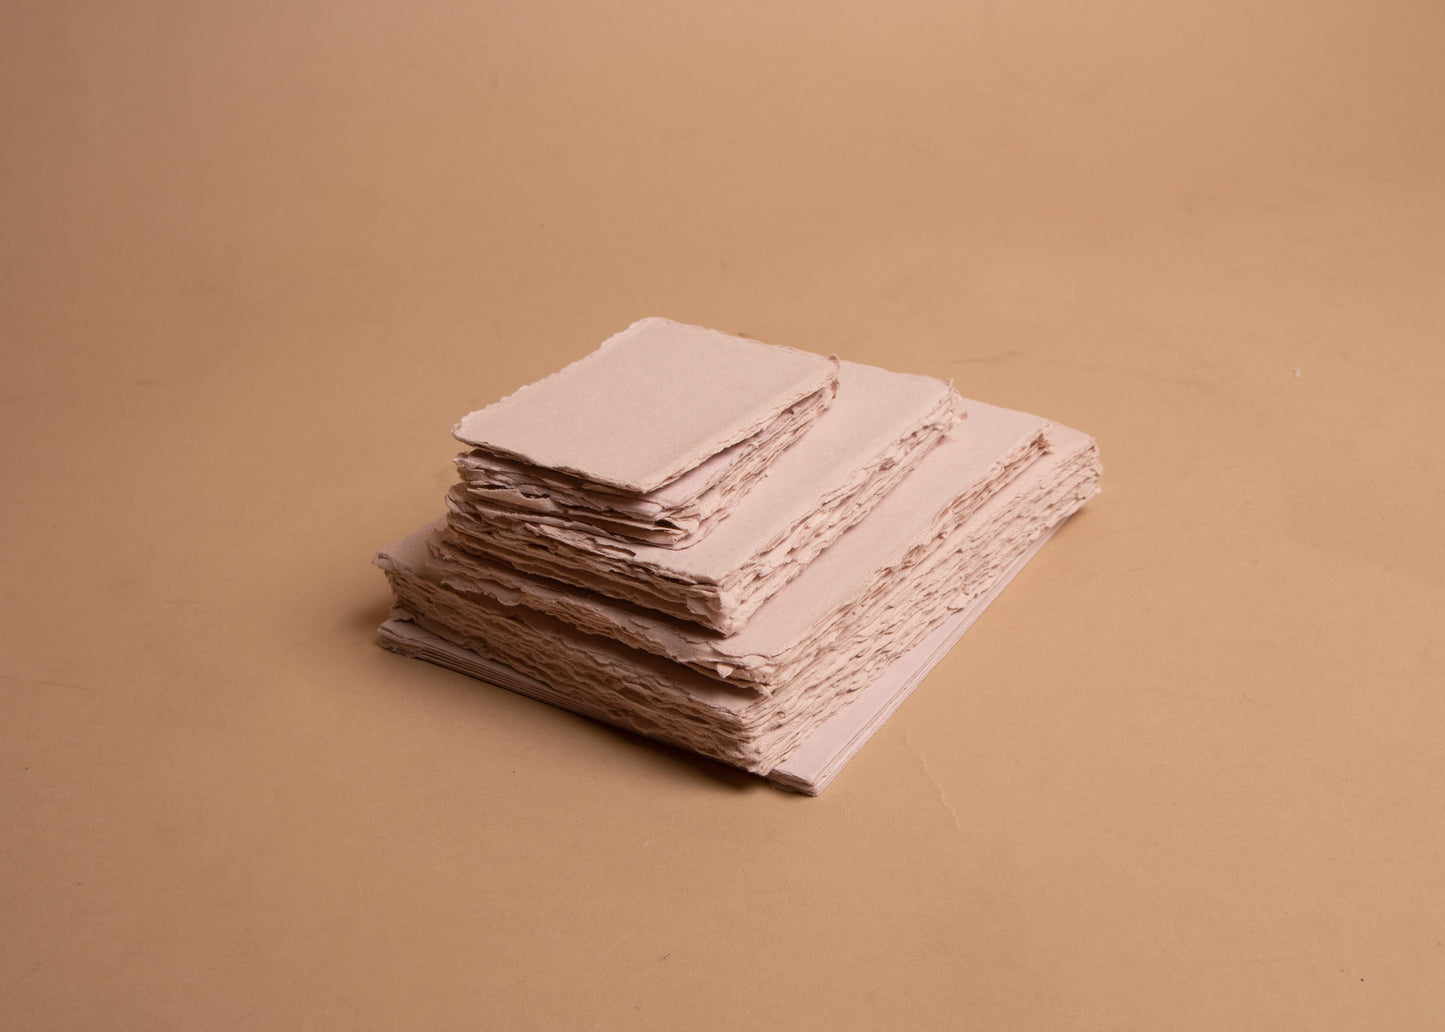 Stack of various sized blush handmade paper sheets and envelopes with deckle edge